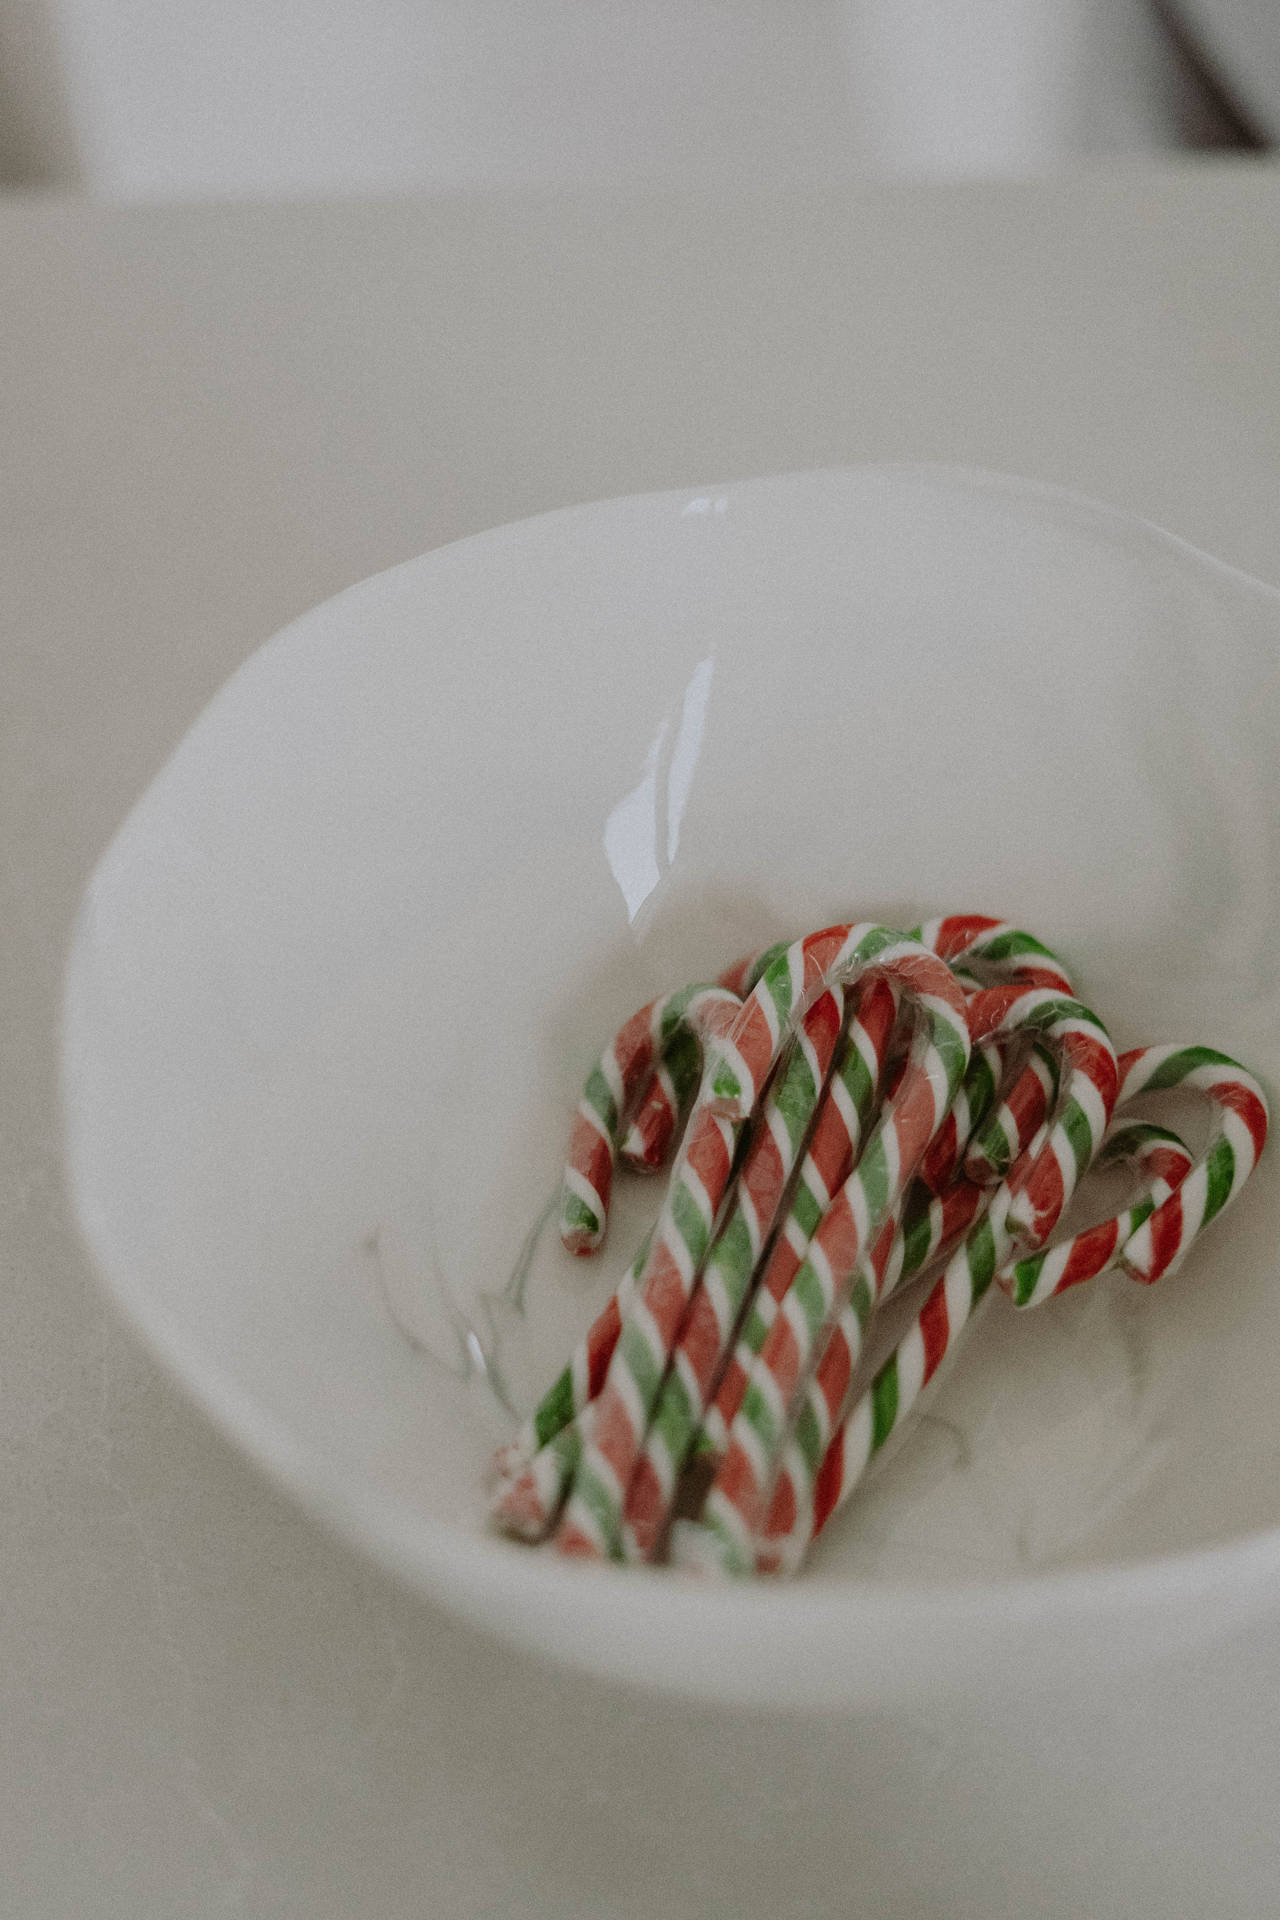 Candy Cane 3327X4991 Wallpaper and Background Image